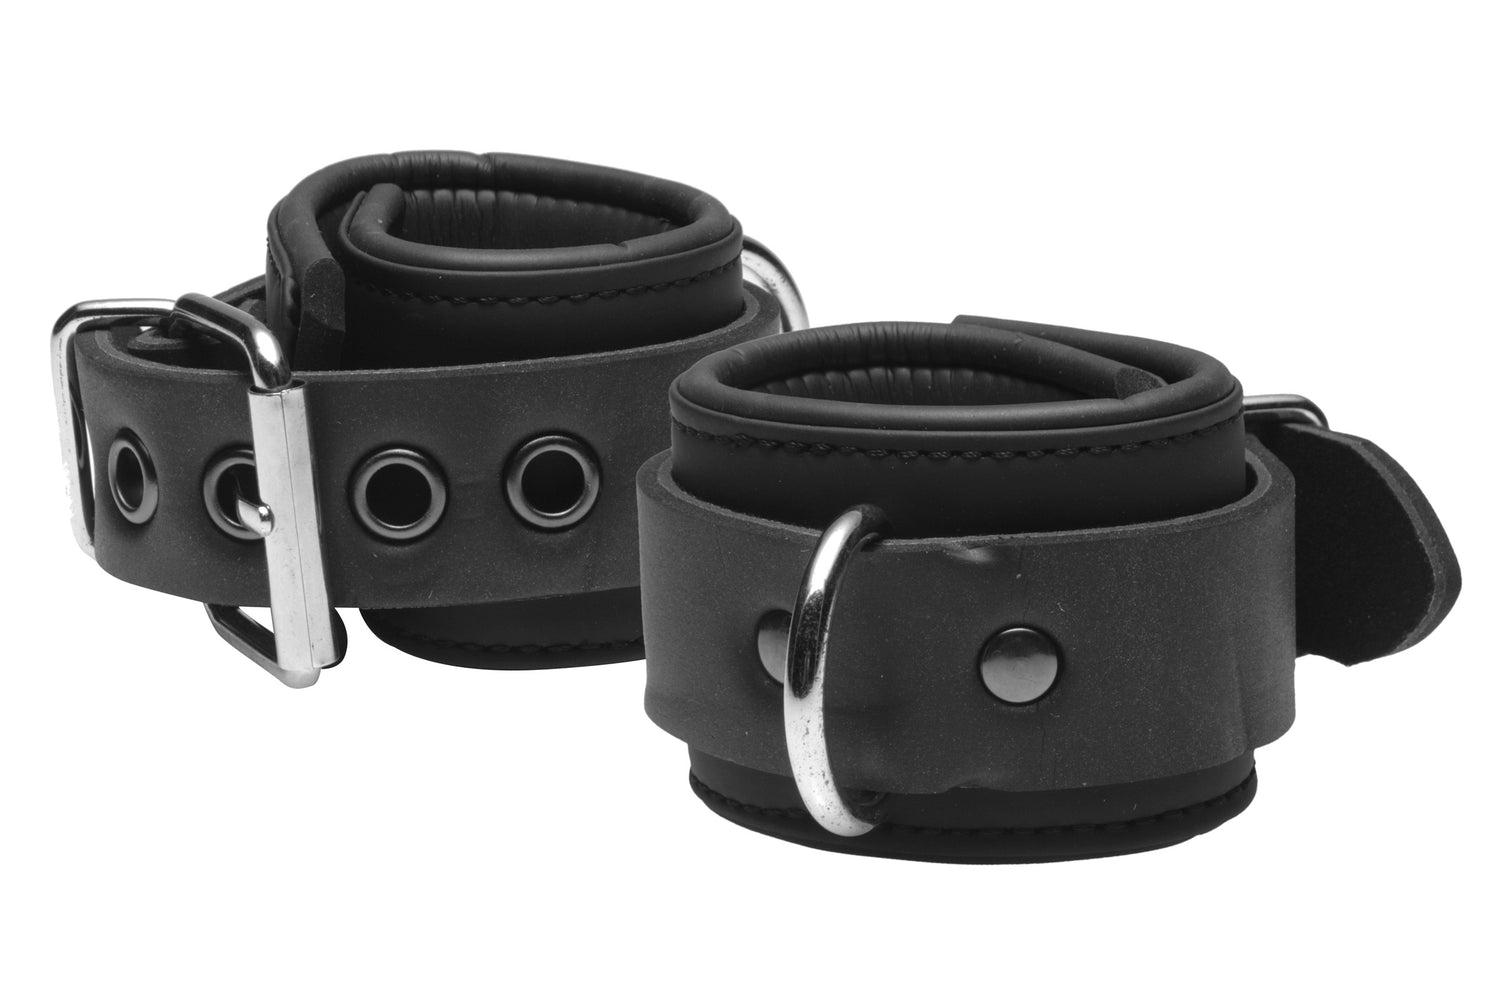 Serve Neoprene Buckle Cuffs - Just for you desires